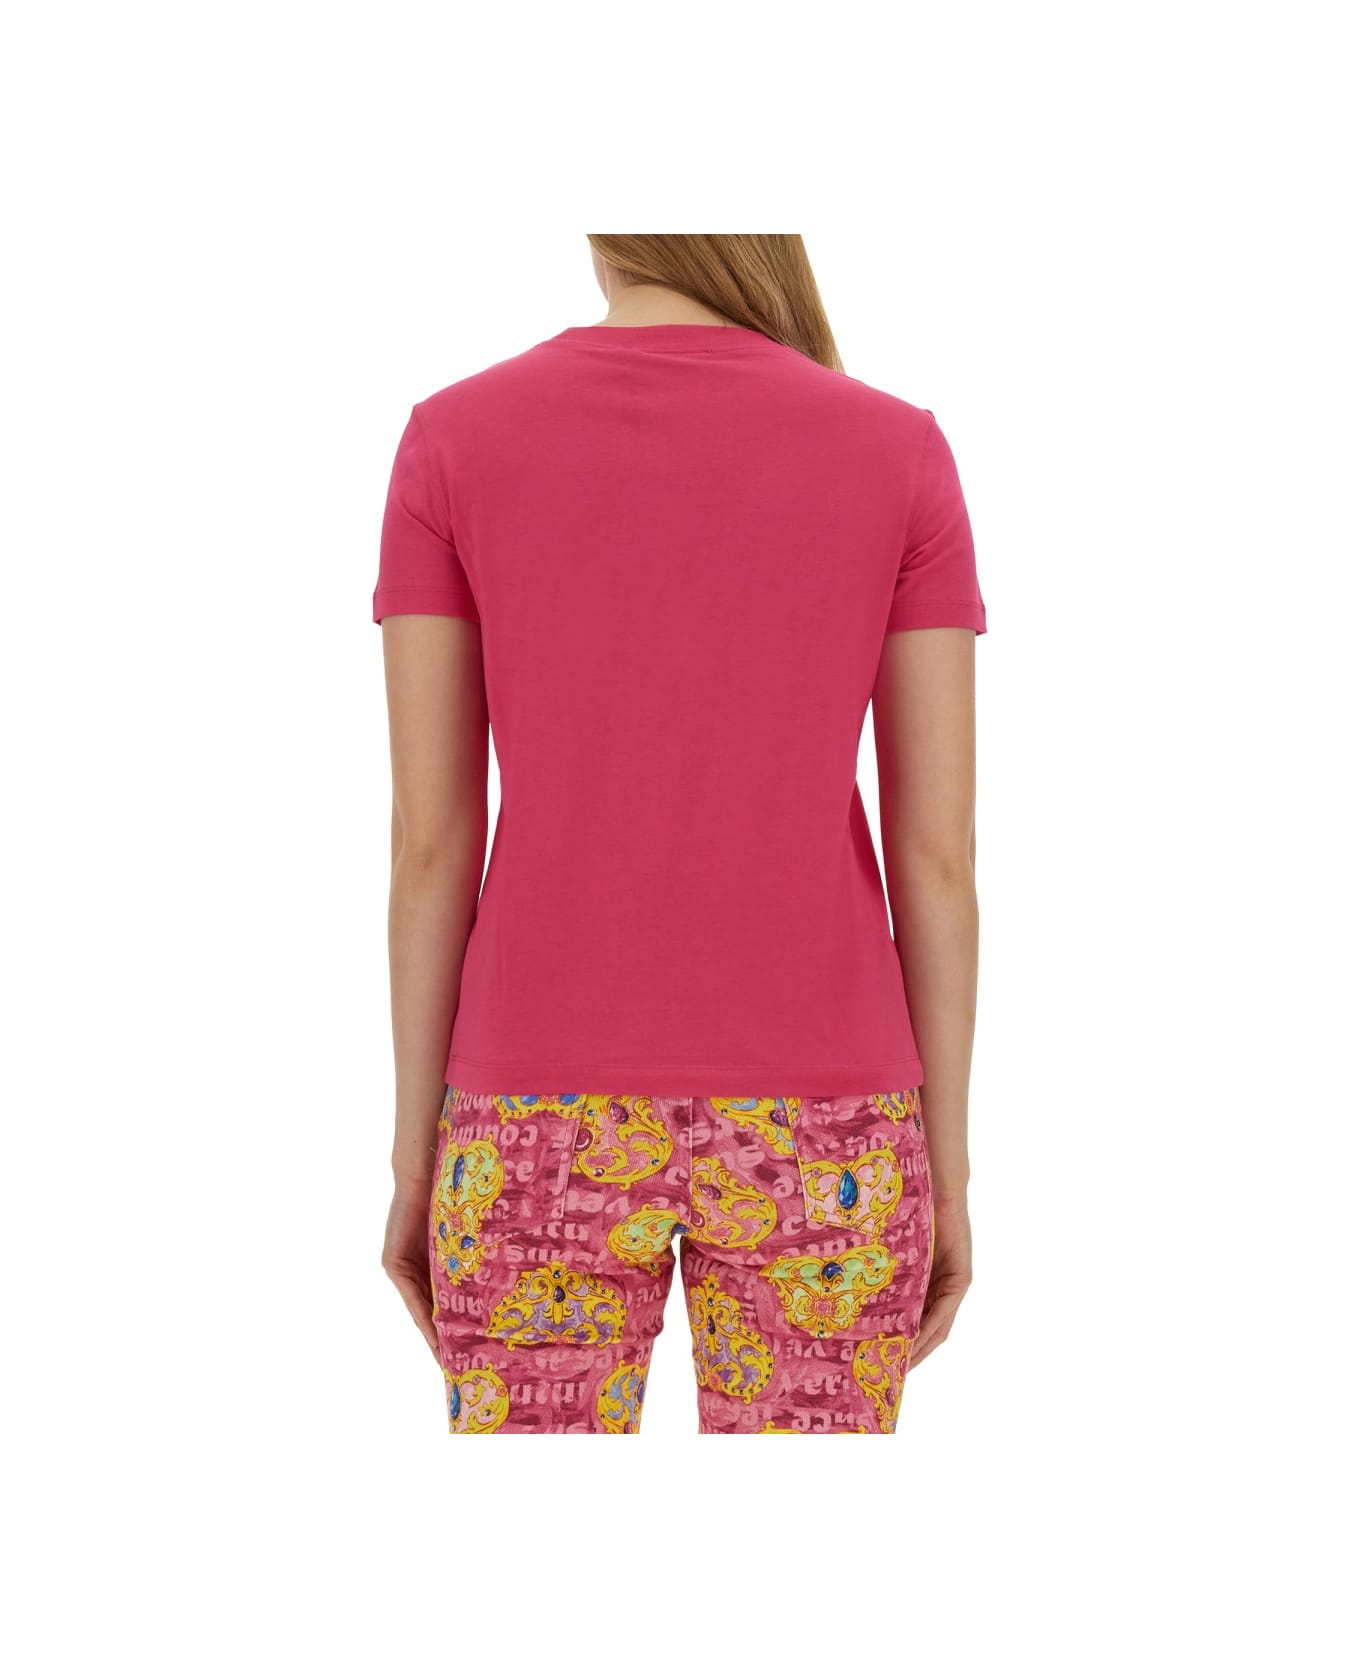 Versace Jeans Couture T-shirt With Logo - FUCSIA